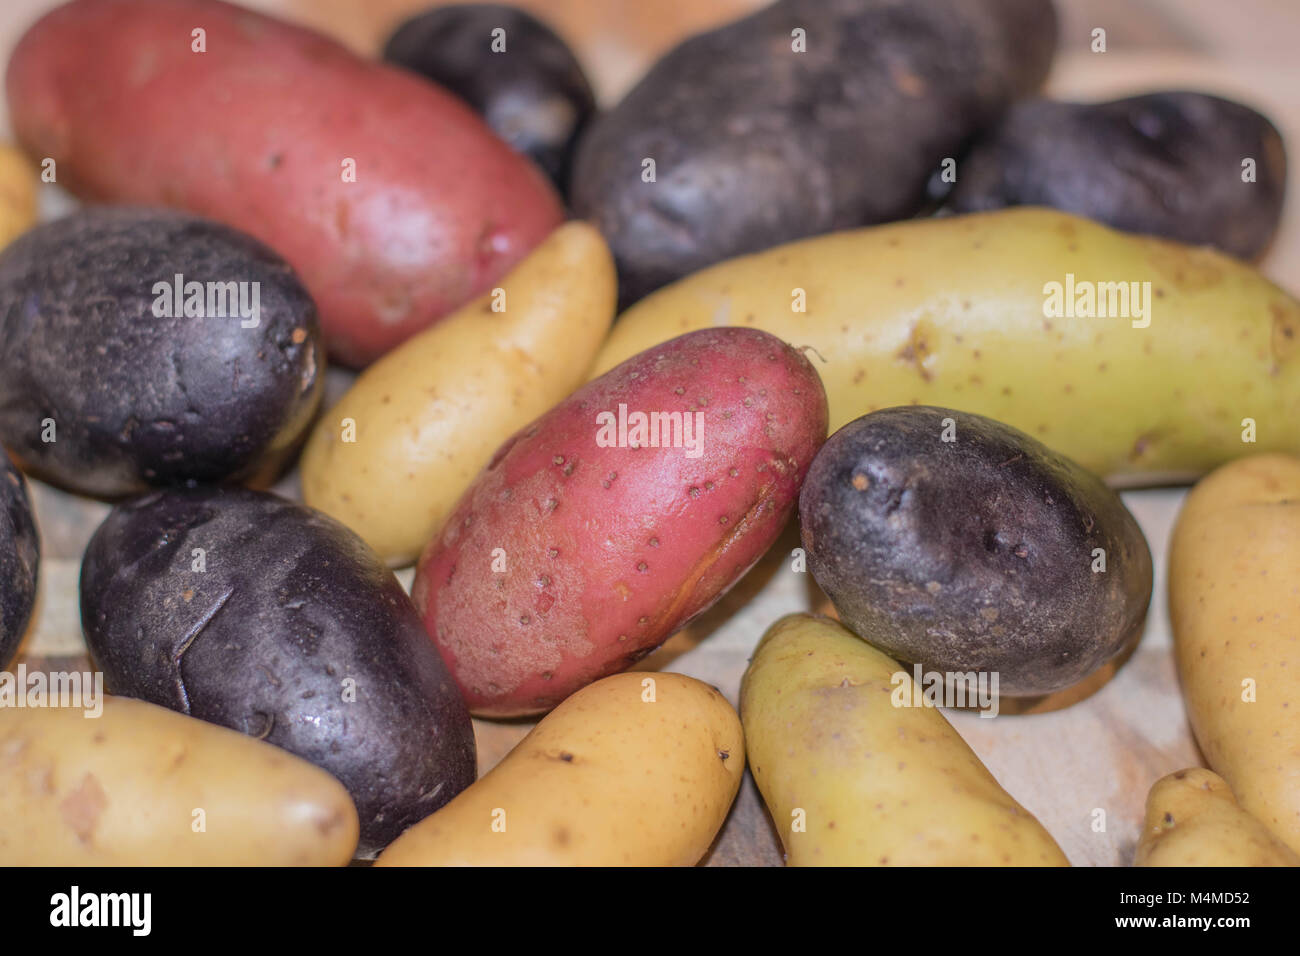 Purple, yellow, and red potatoes, close-up and isolated Stock Photo